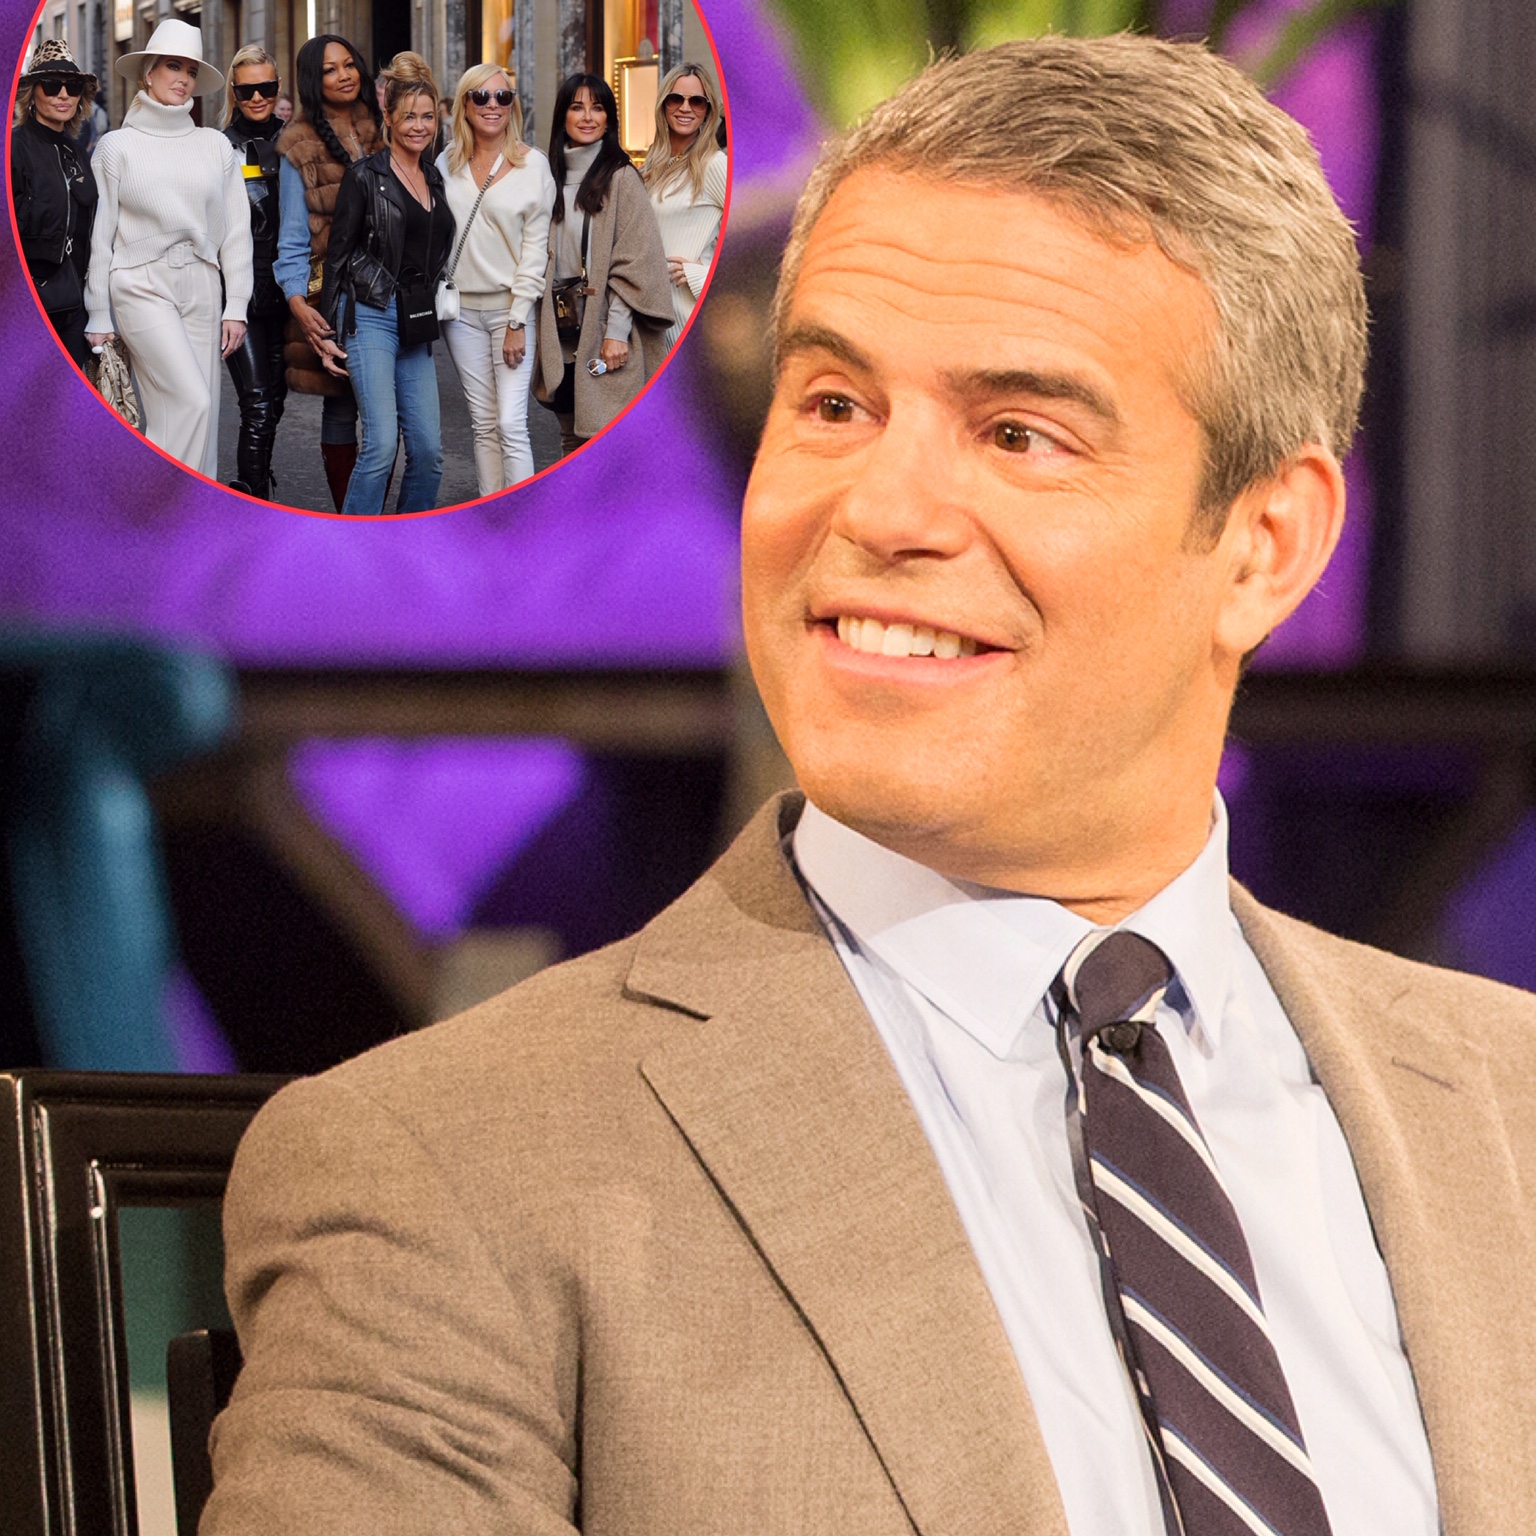 Andy Cohen Says Rhobh Season 10 Trailer Will Be Released In “another Month Or More”